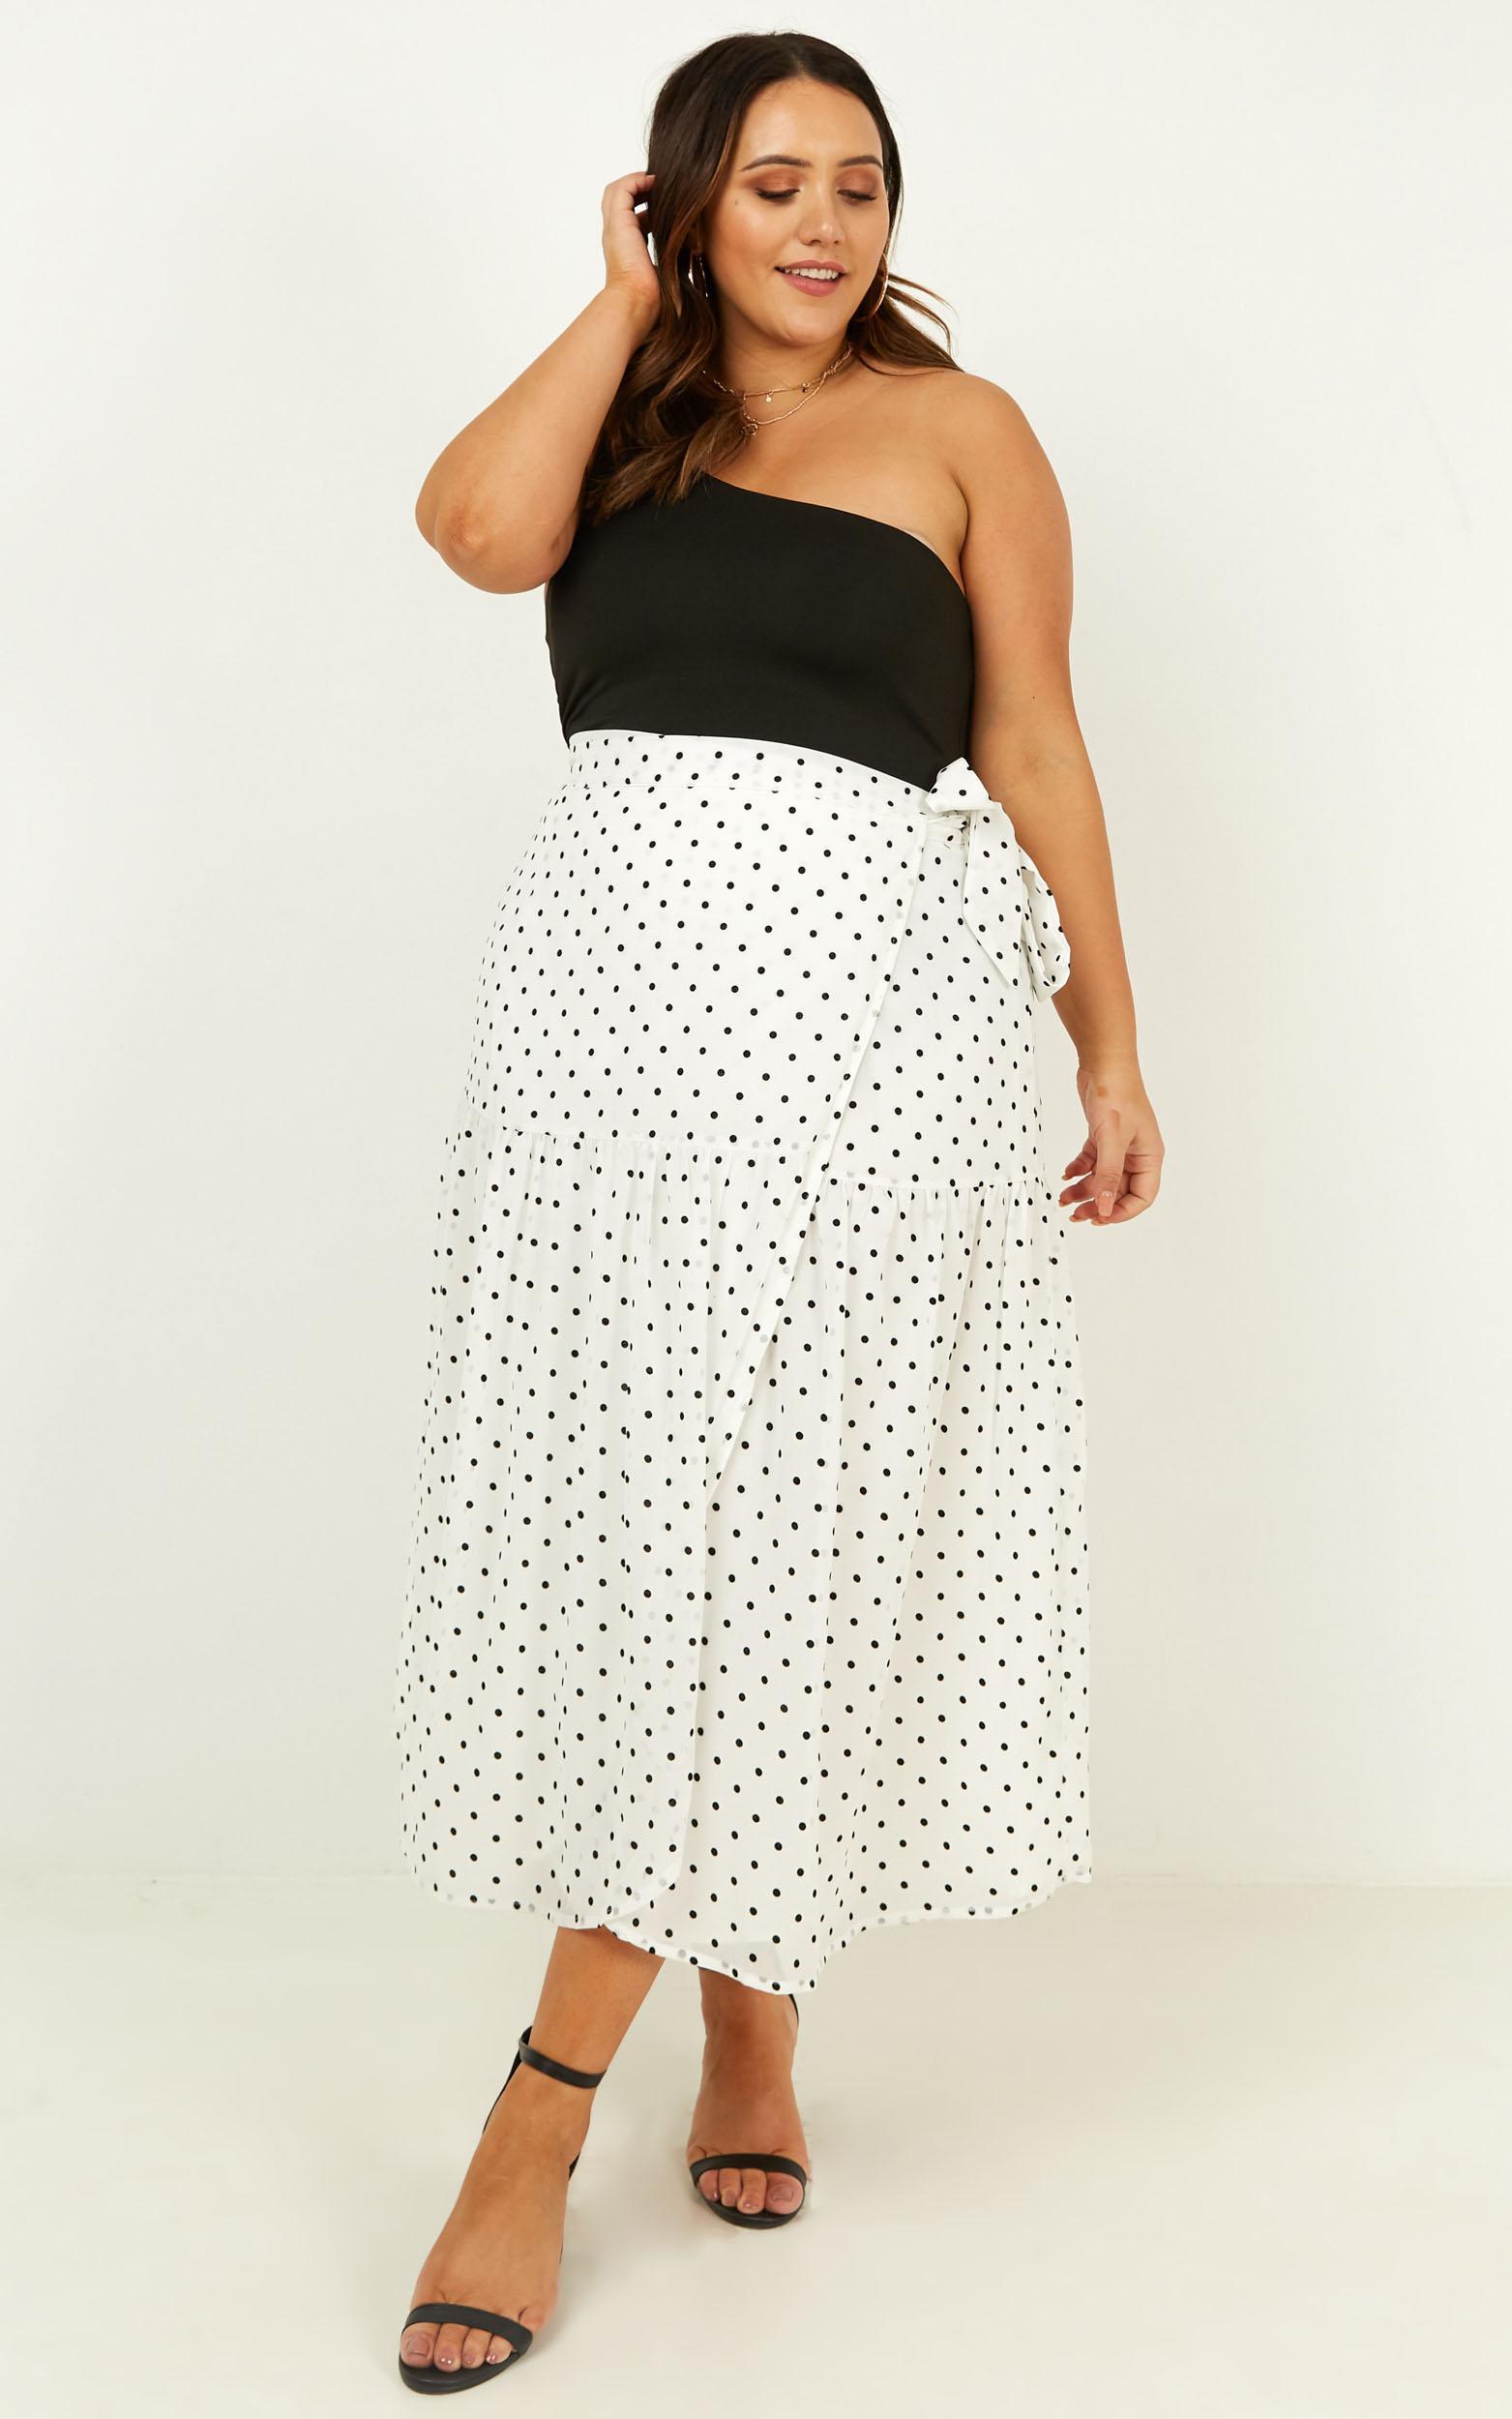 Things On My Mind Skirt In black spot - 12 (L), Black, hi-res image number null